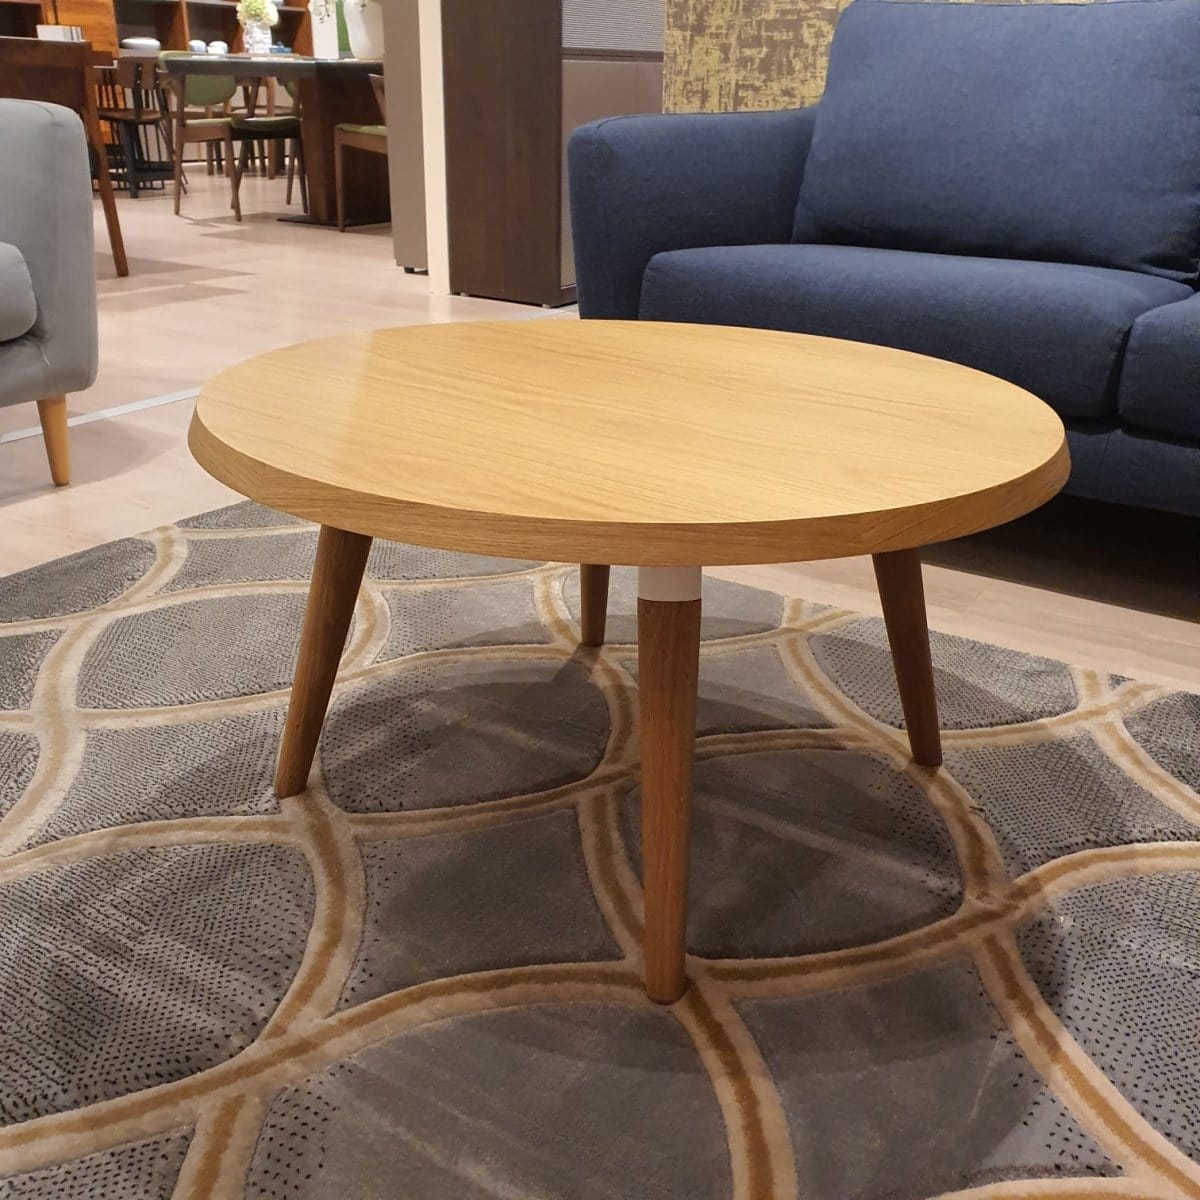 Copine Round Coffee Table in American Walnut (MCS-SD9192B-OAK) (C2209) picket and rail